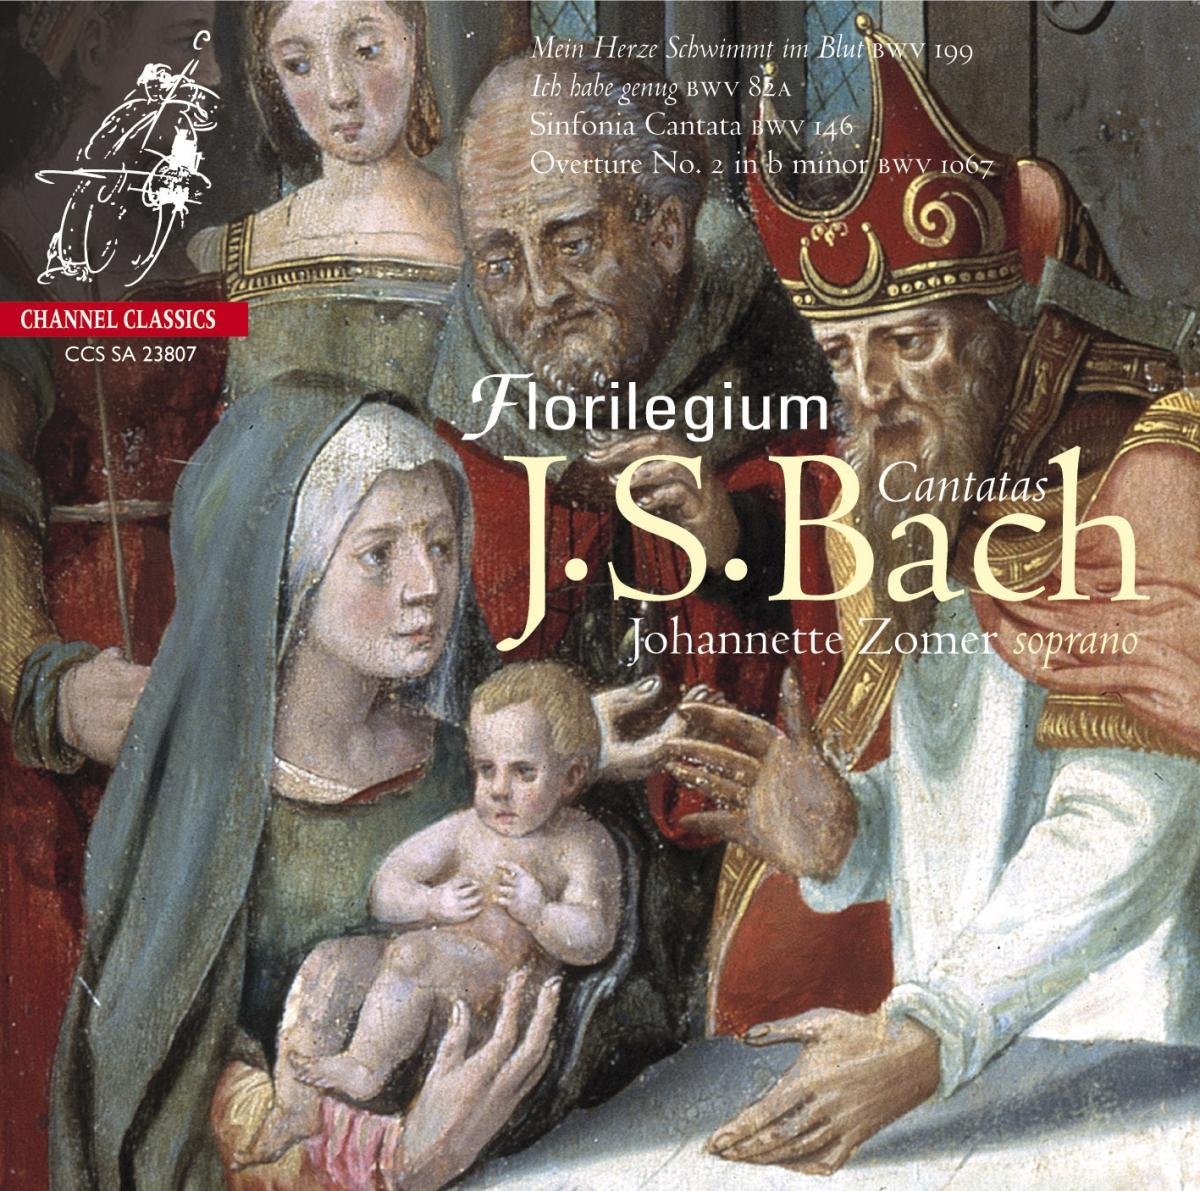 Florilegium - Bach Cantatas & Other Vocal Works - Discography